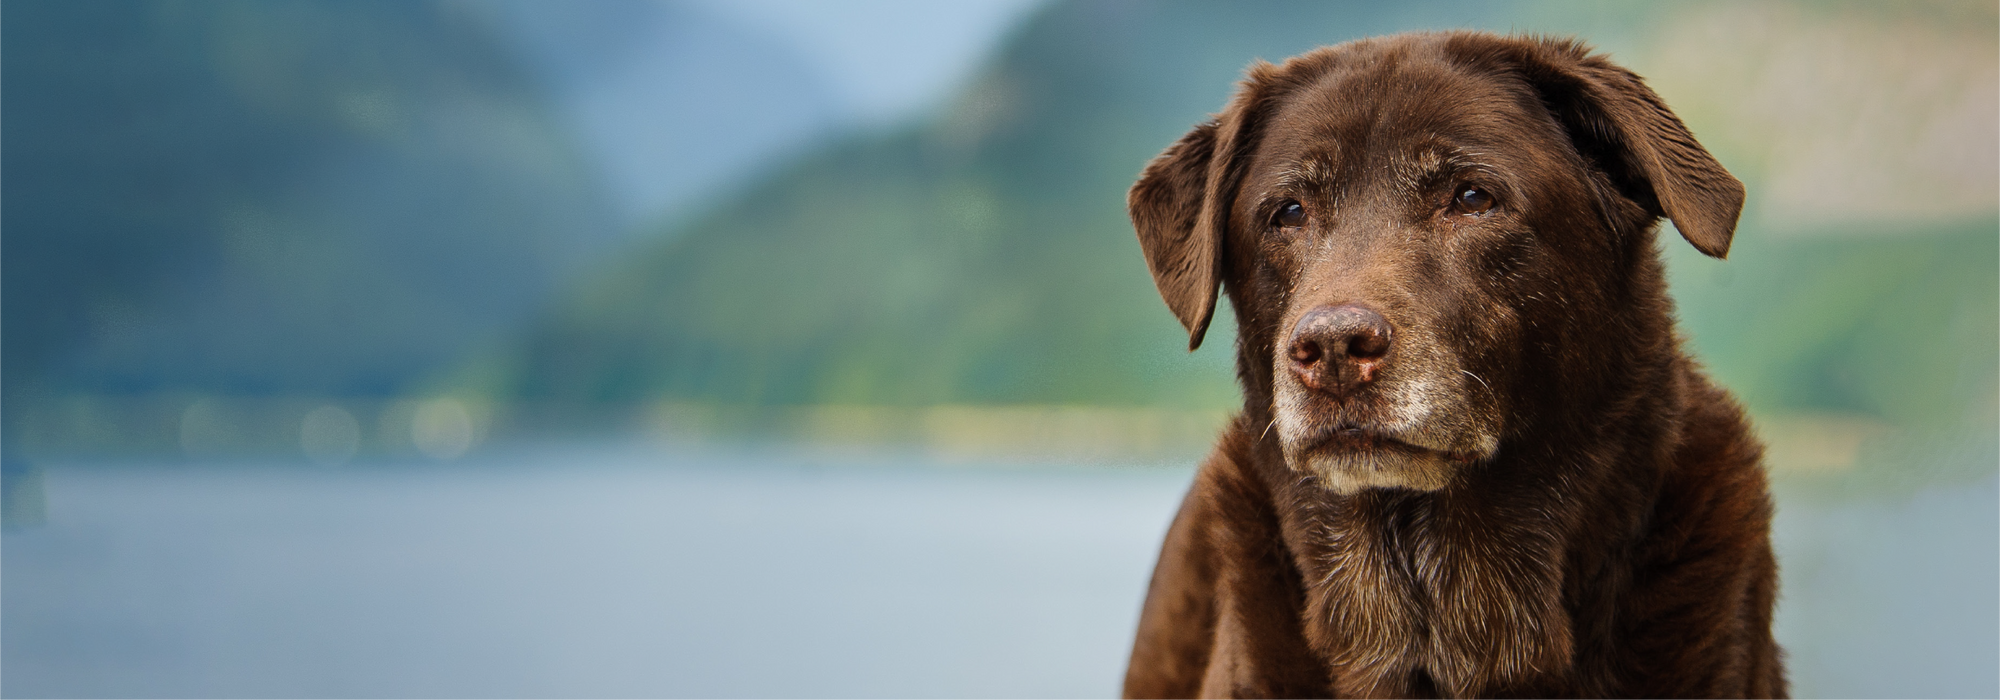 7 Signs Your Dog Is Getting Old (And What You Can Do About It)